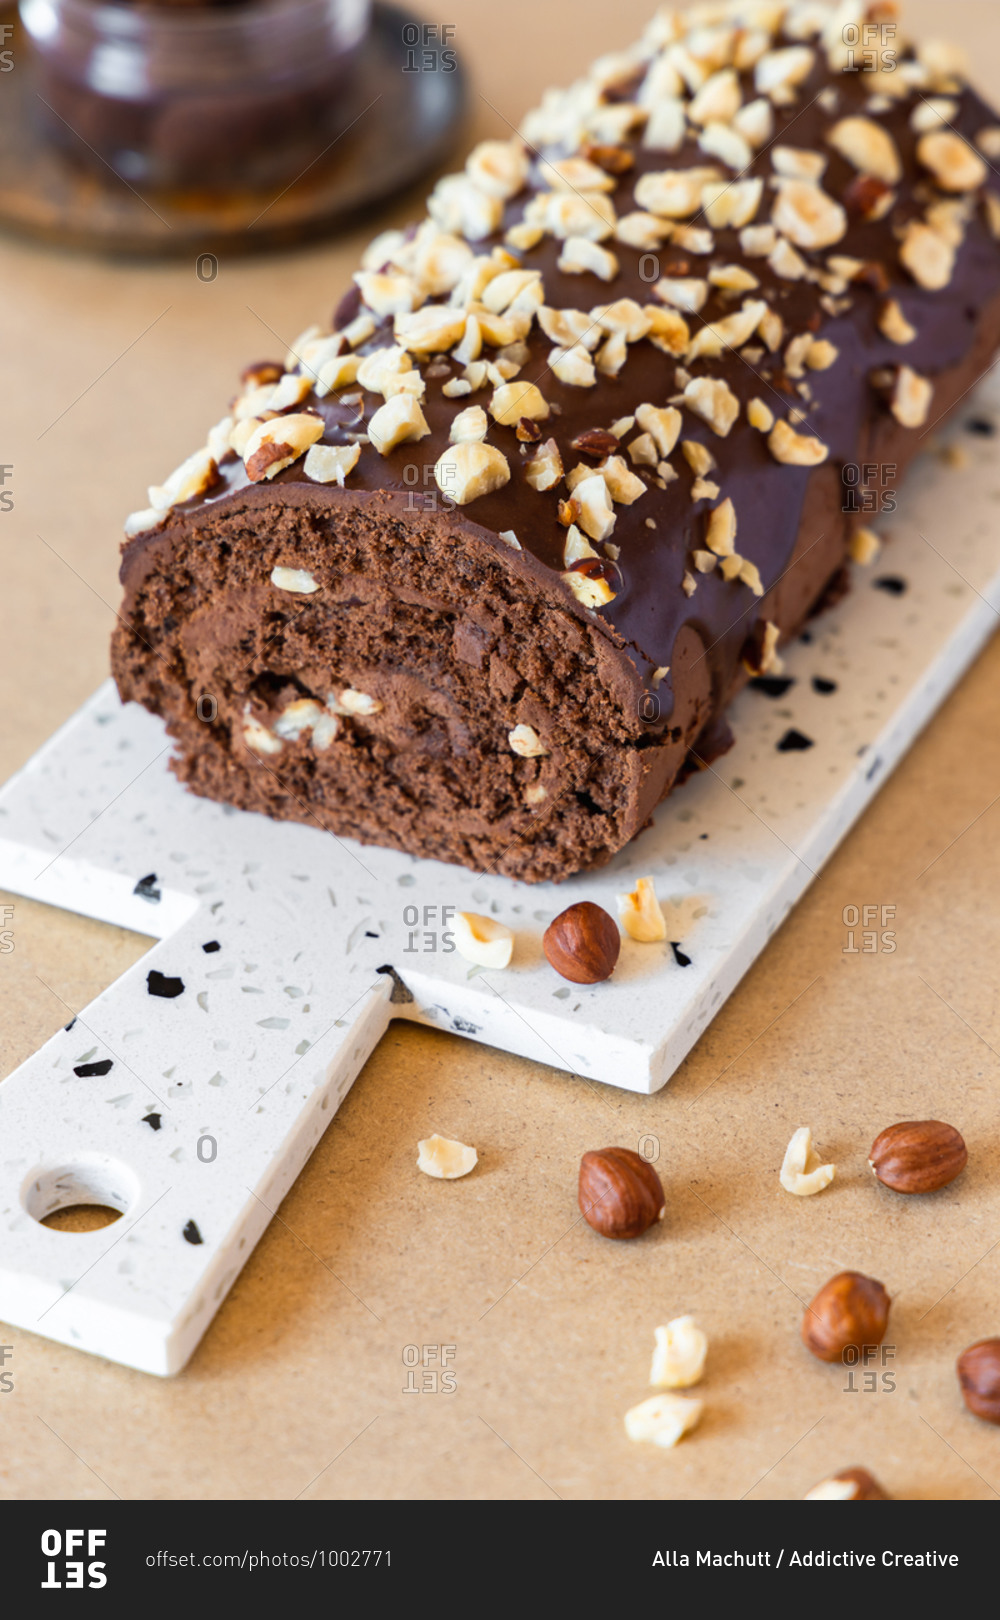 Delicious homemade roll cake with chocolate glaze and hazelnut placed on chopping board in modern kitchen